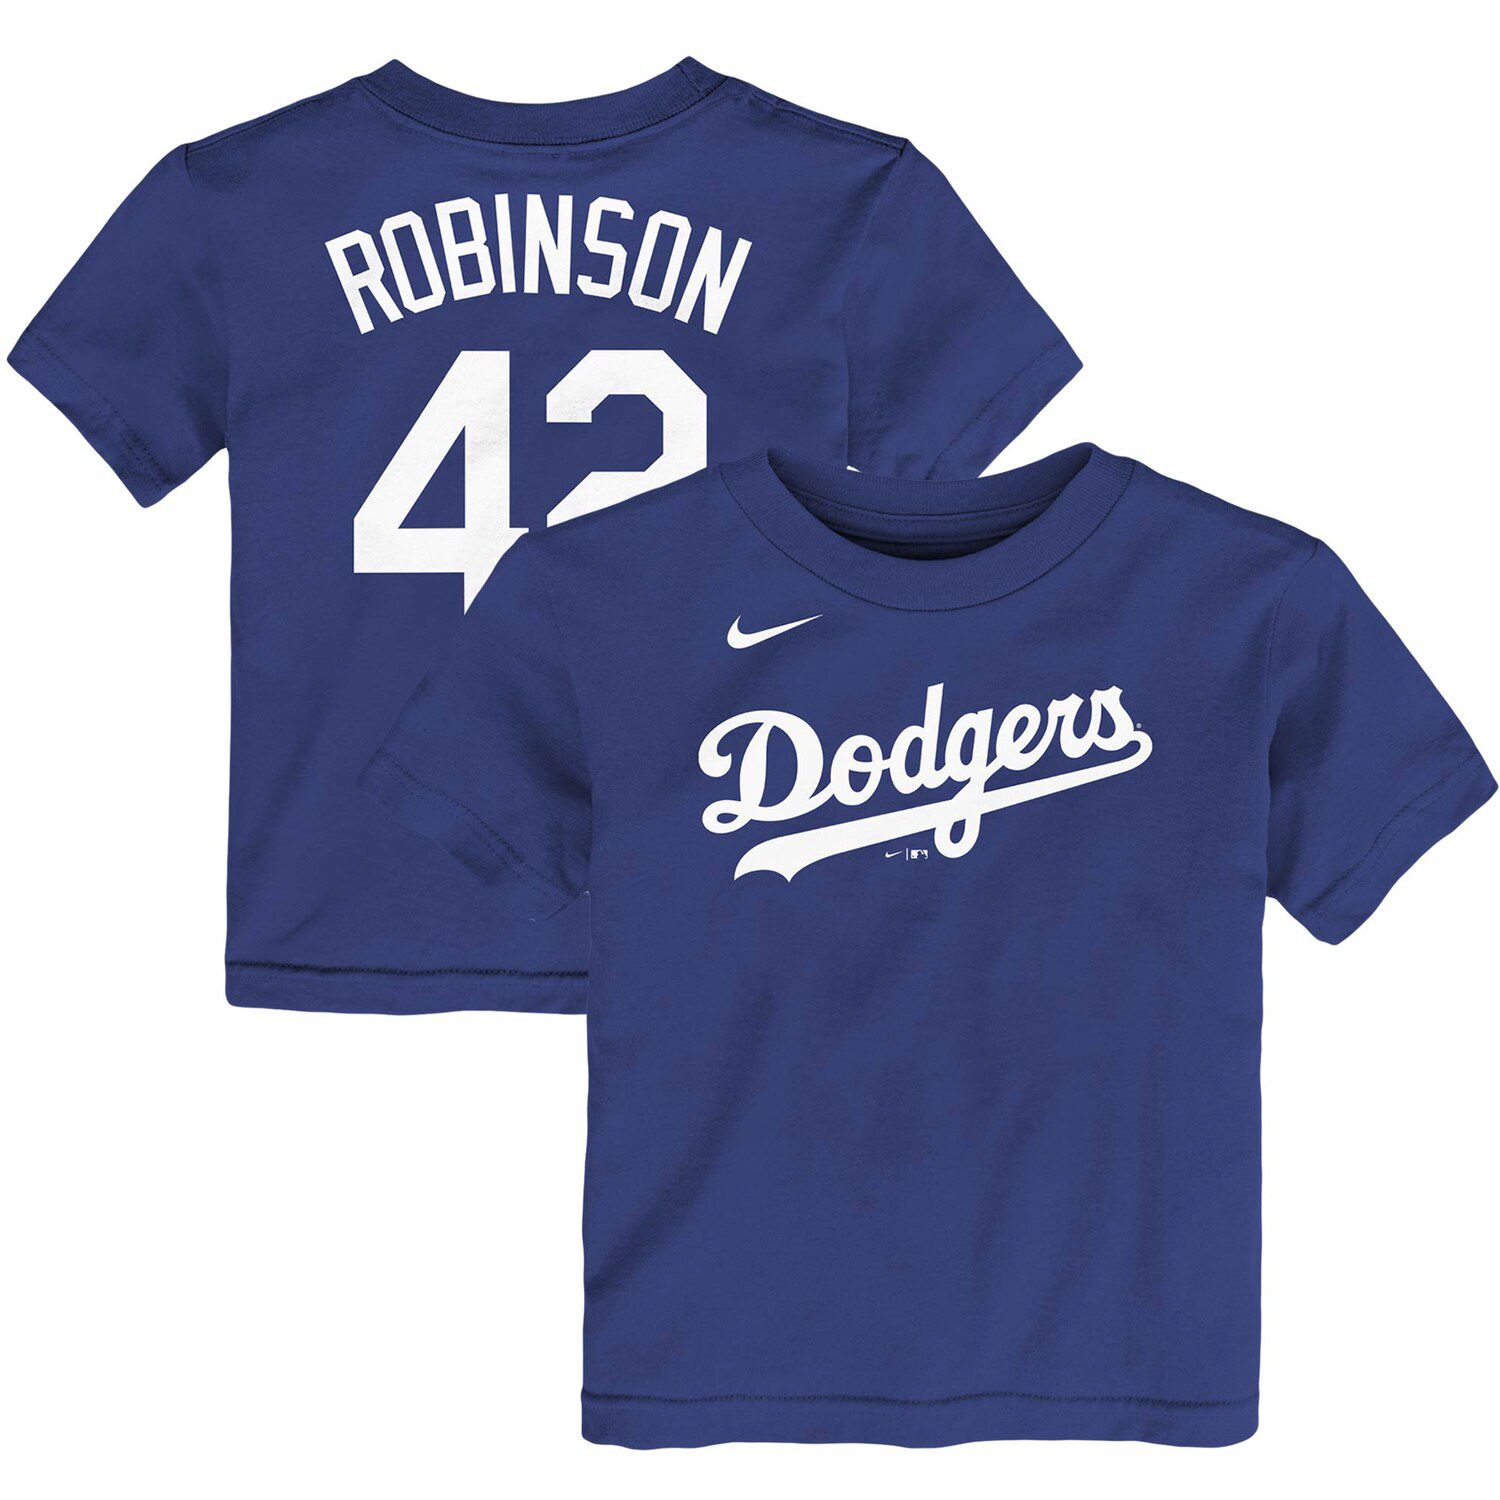 los angeles dodgers jackie robinson jersey